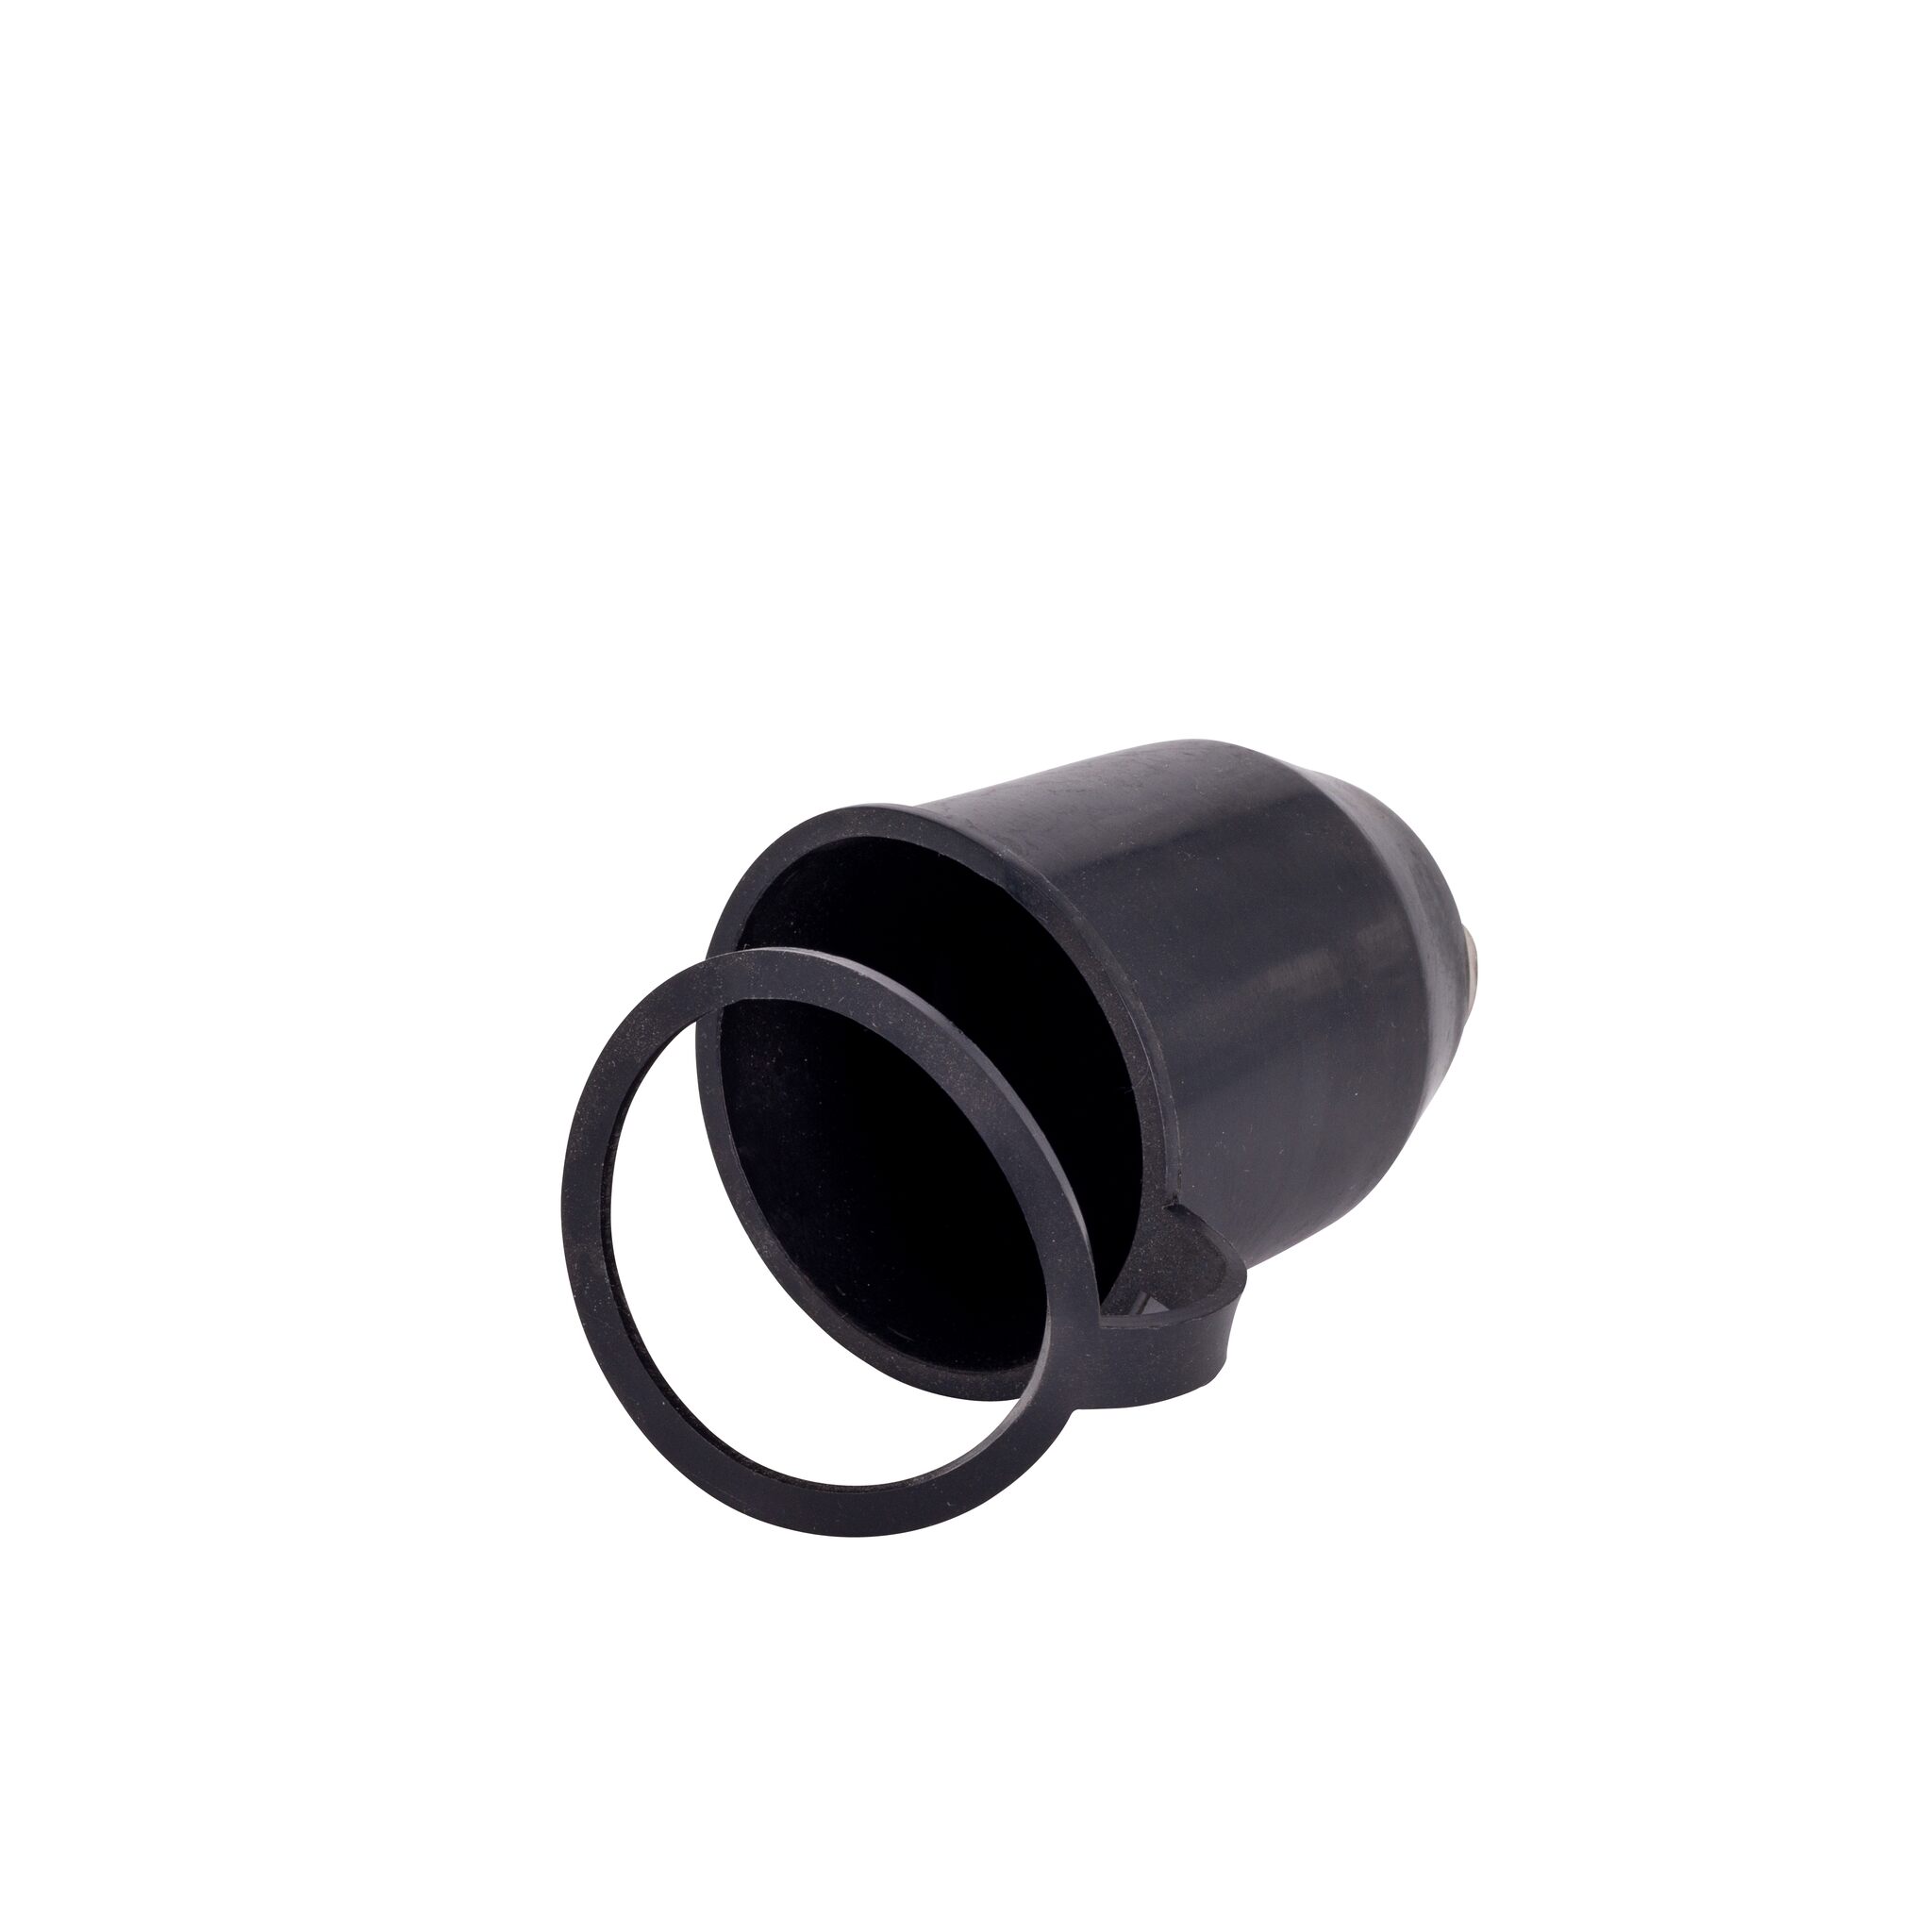 Coupling protection cap